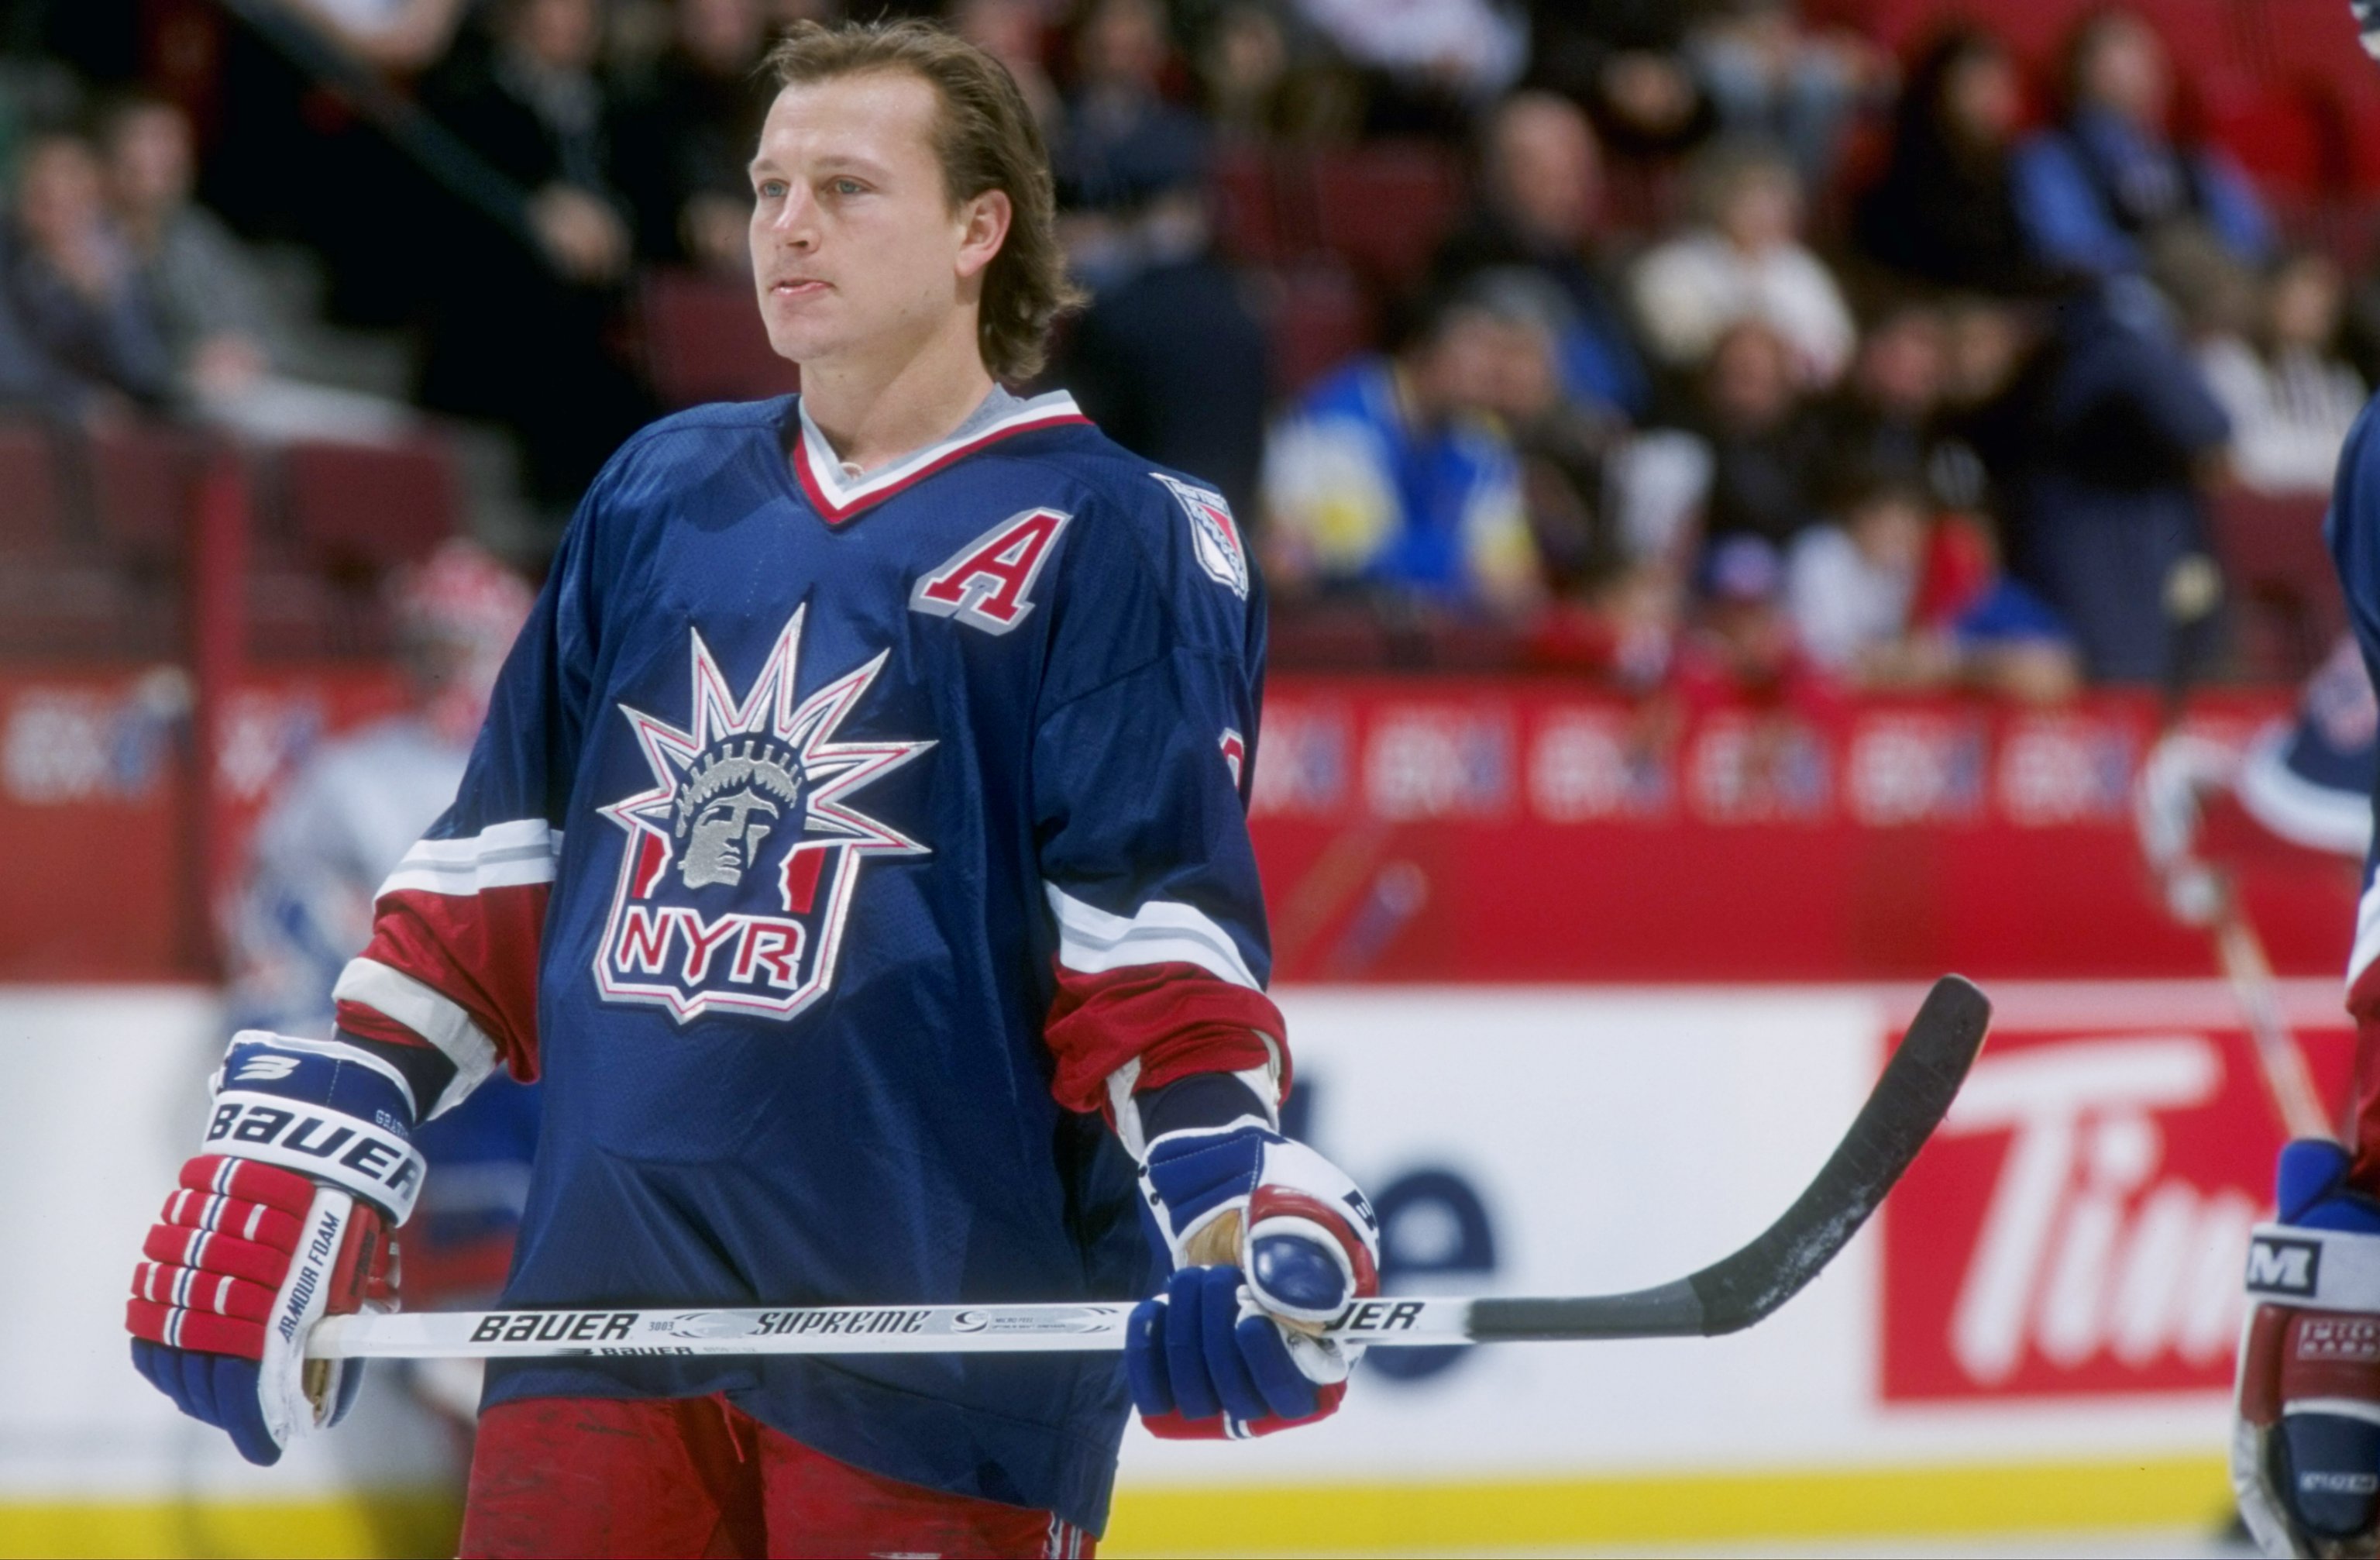 New York Rangers: The greatest game ever played